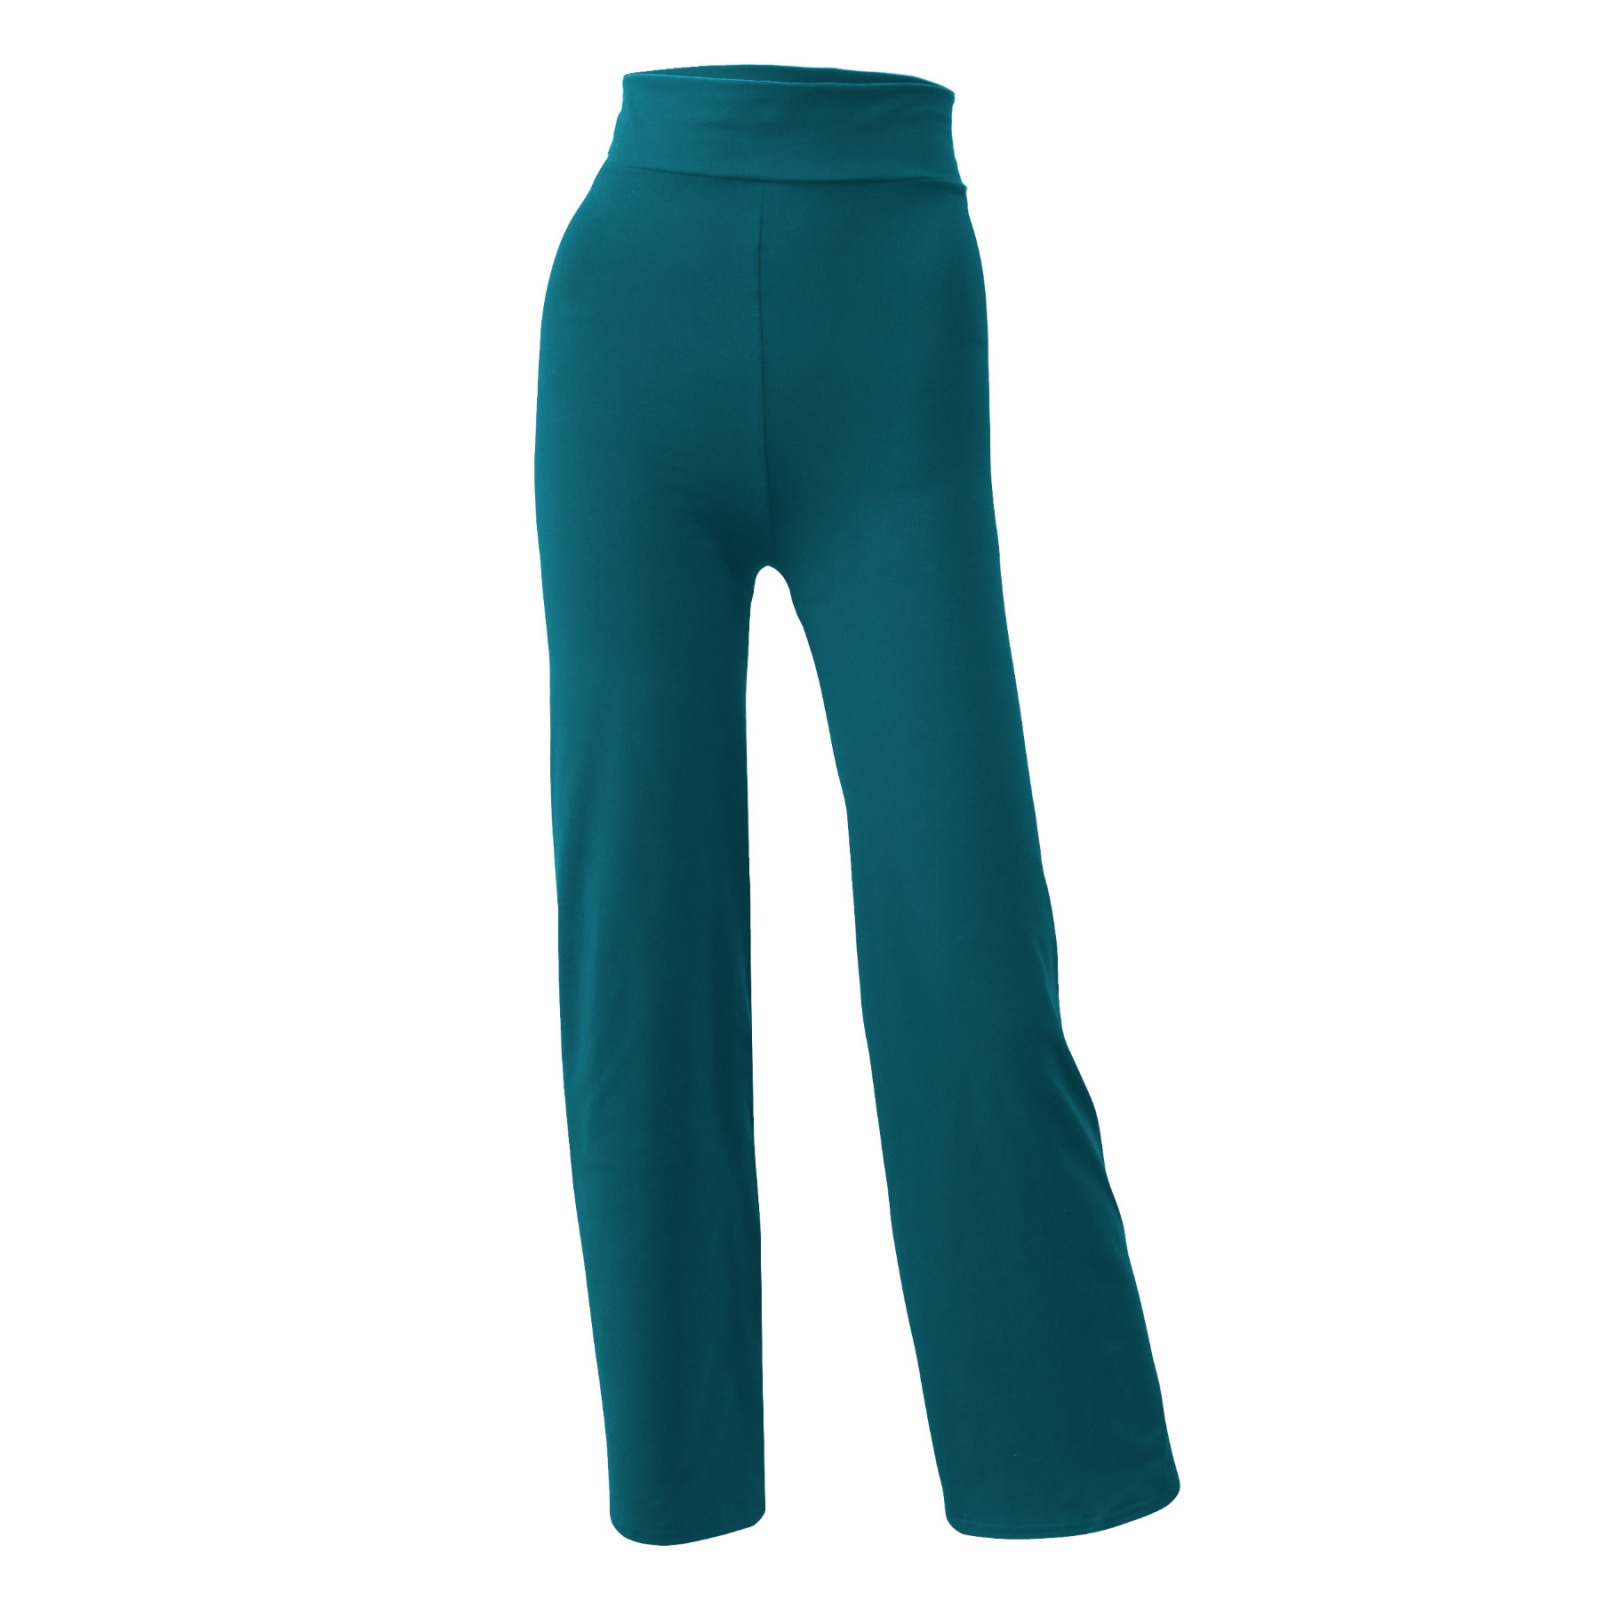 Yoga pants Relaxed Fit teal blue